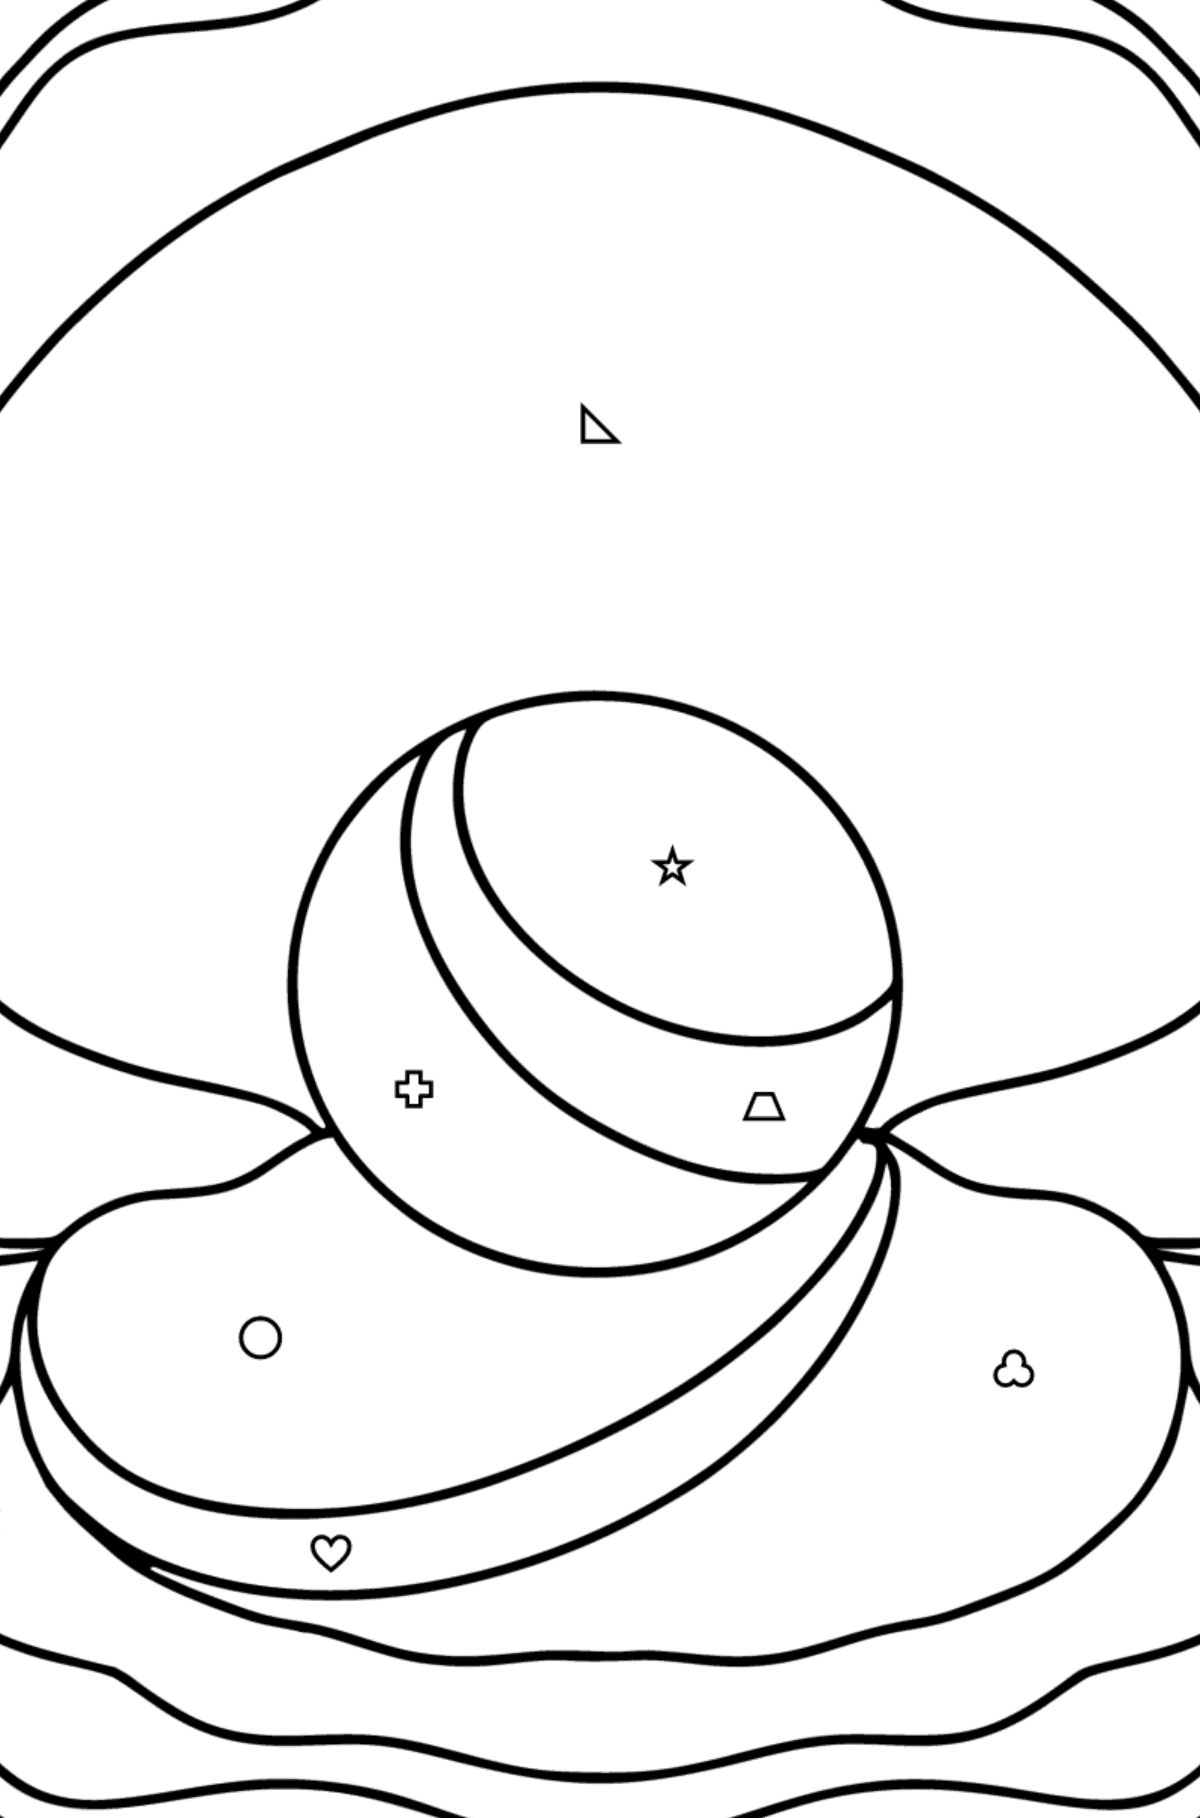 Shell with pearl coloring page - Coloring by Geometric Shapes for Kids